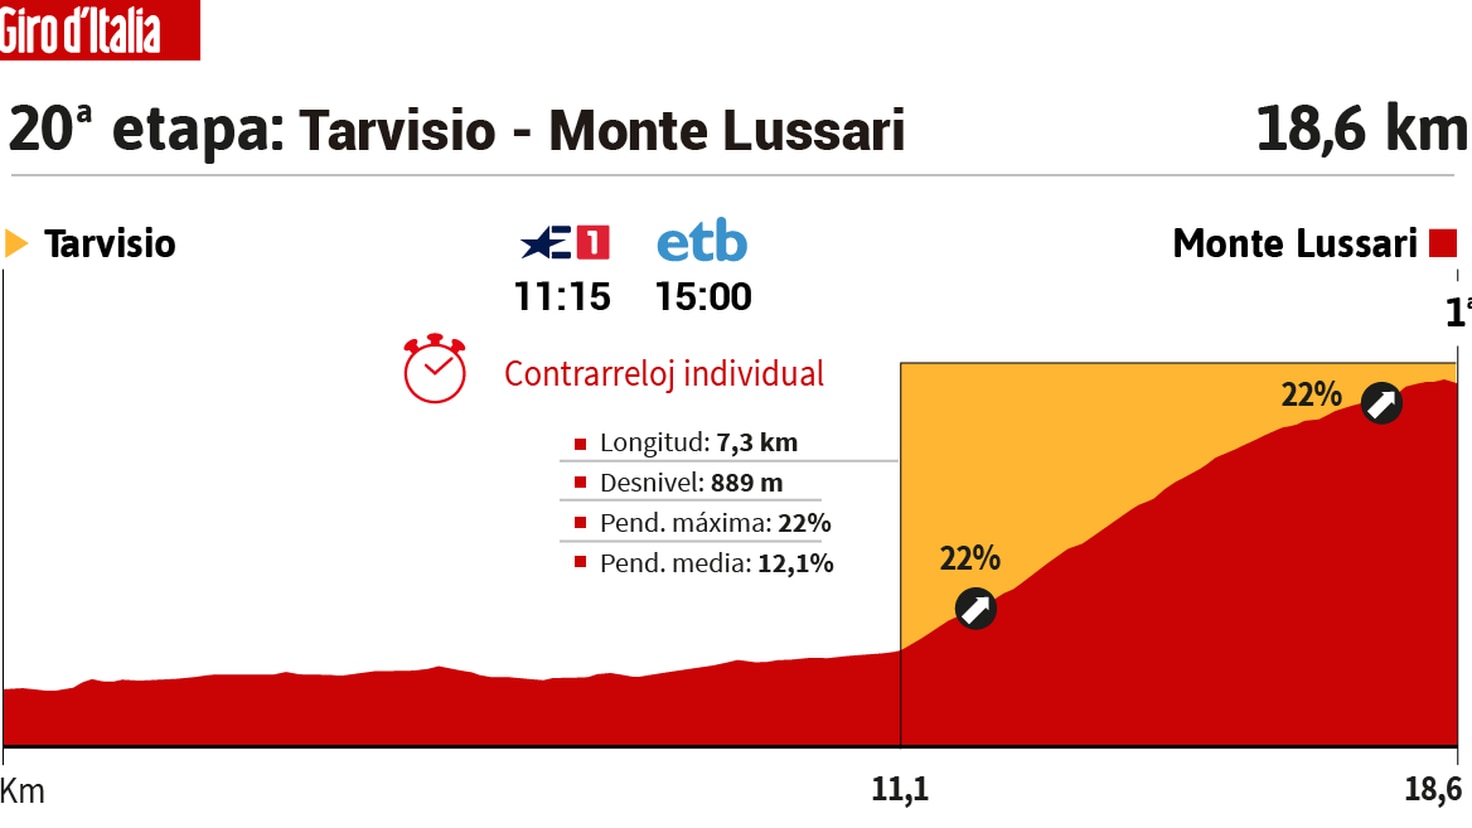 Giro d'Italia today, stage 20: time trial starting order, profile and route
